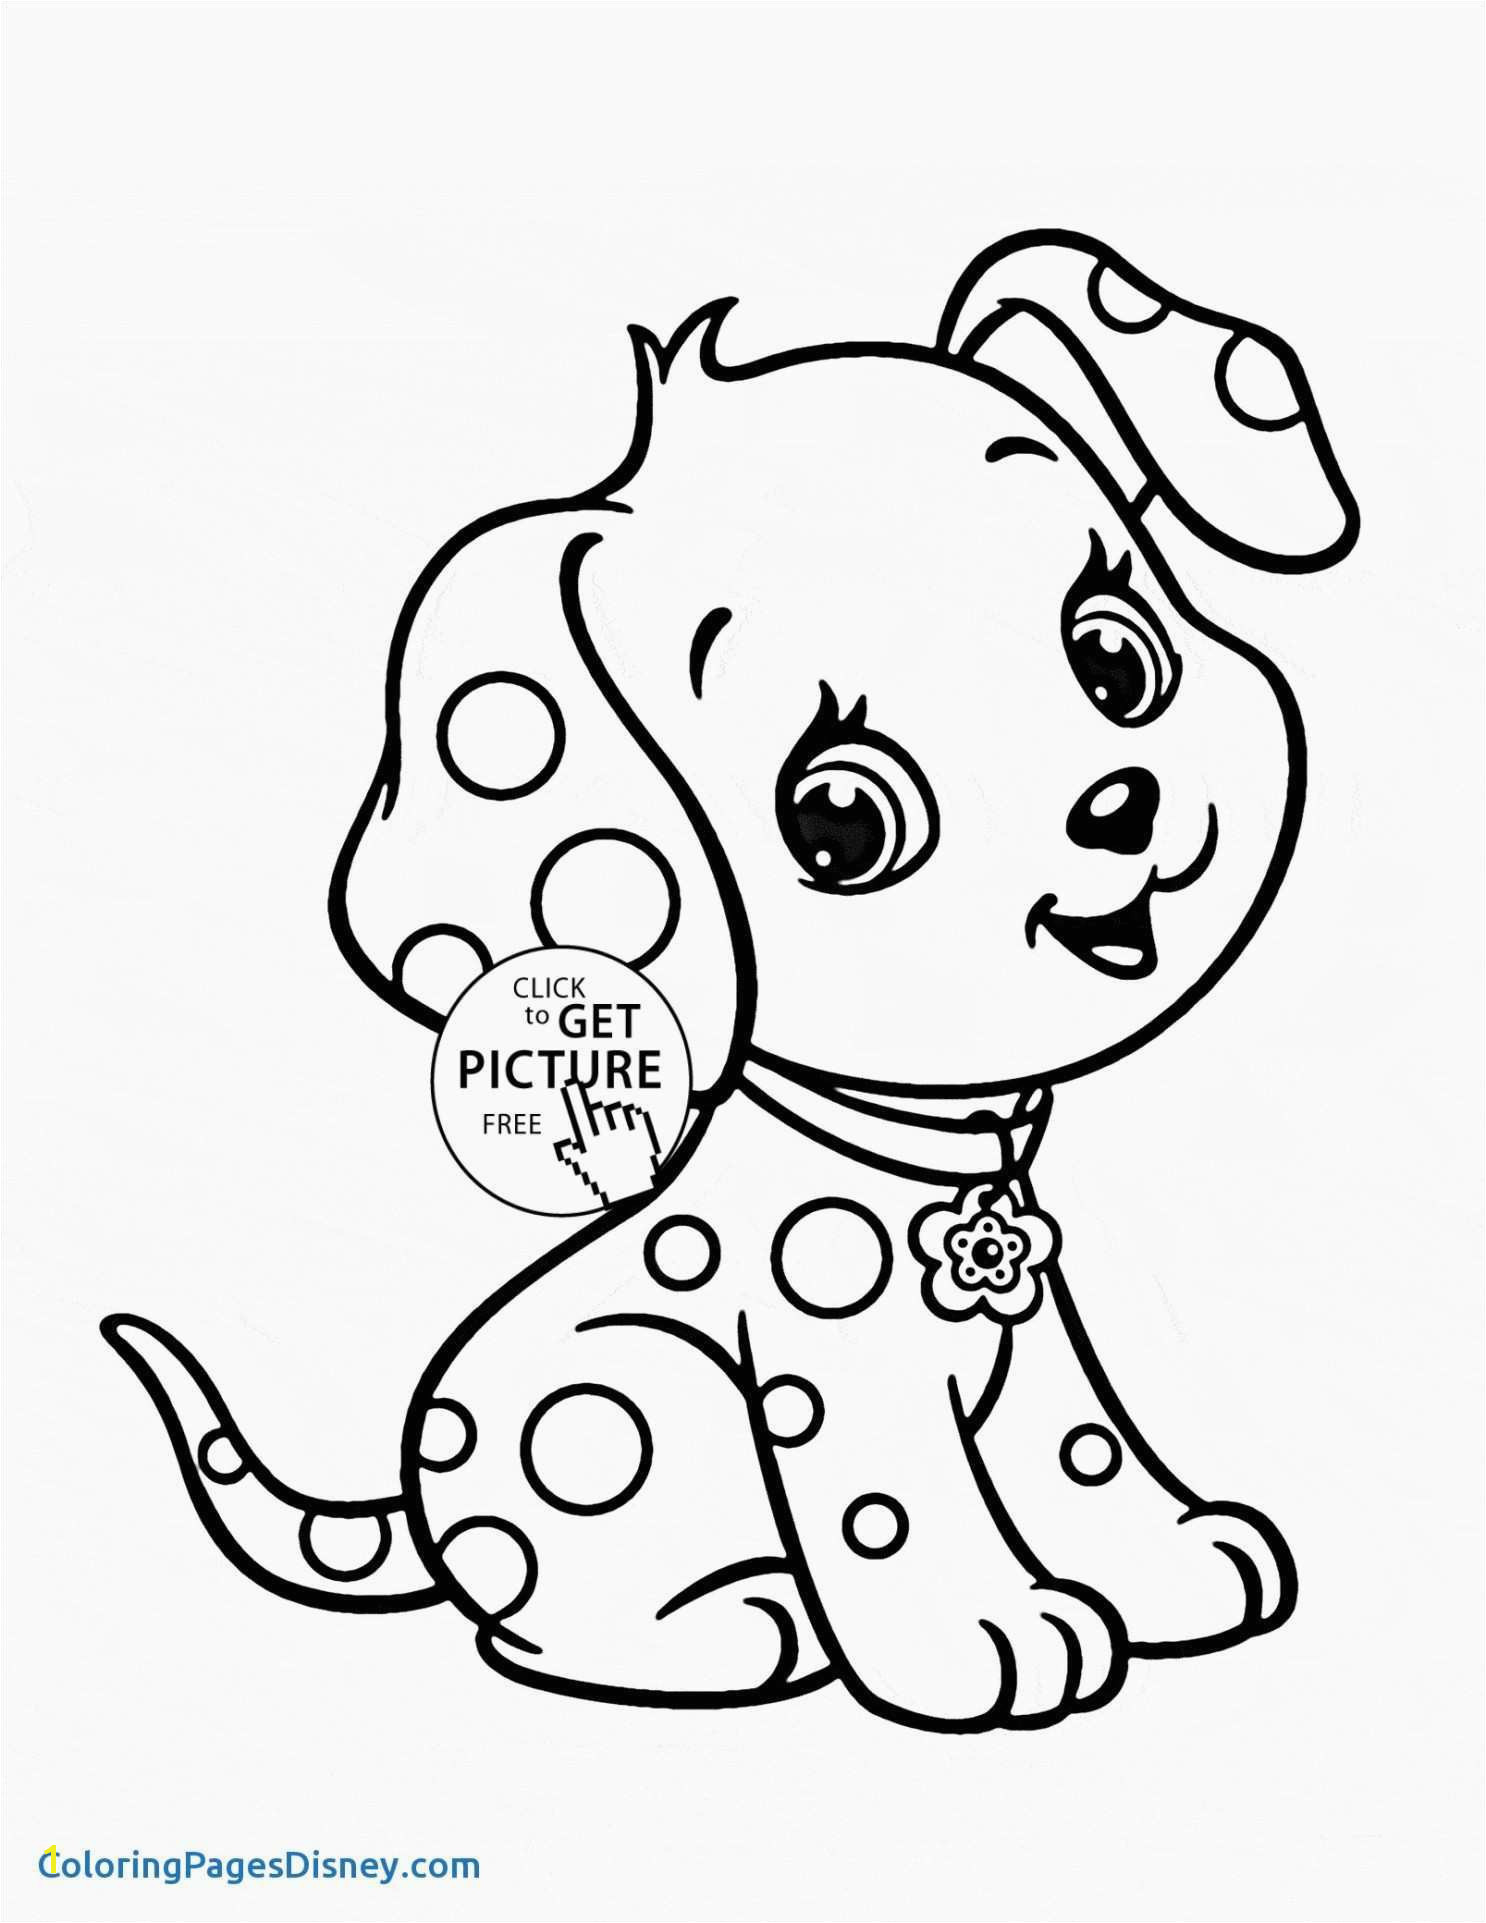 Coloring Pages for Adults Printable Free Coloring Pages Free for Adults New S Fun Art for Kids